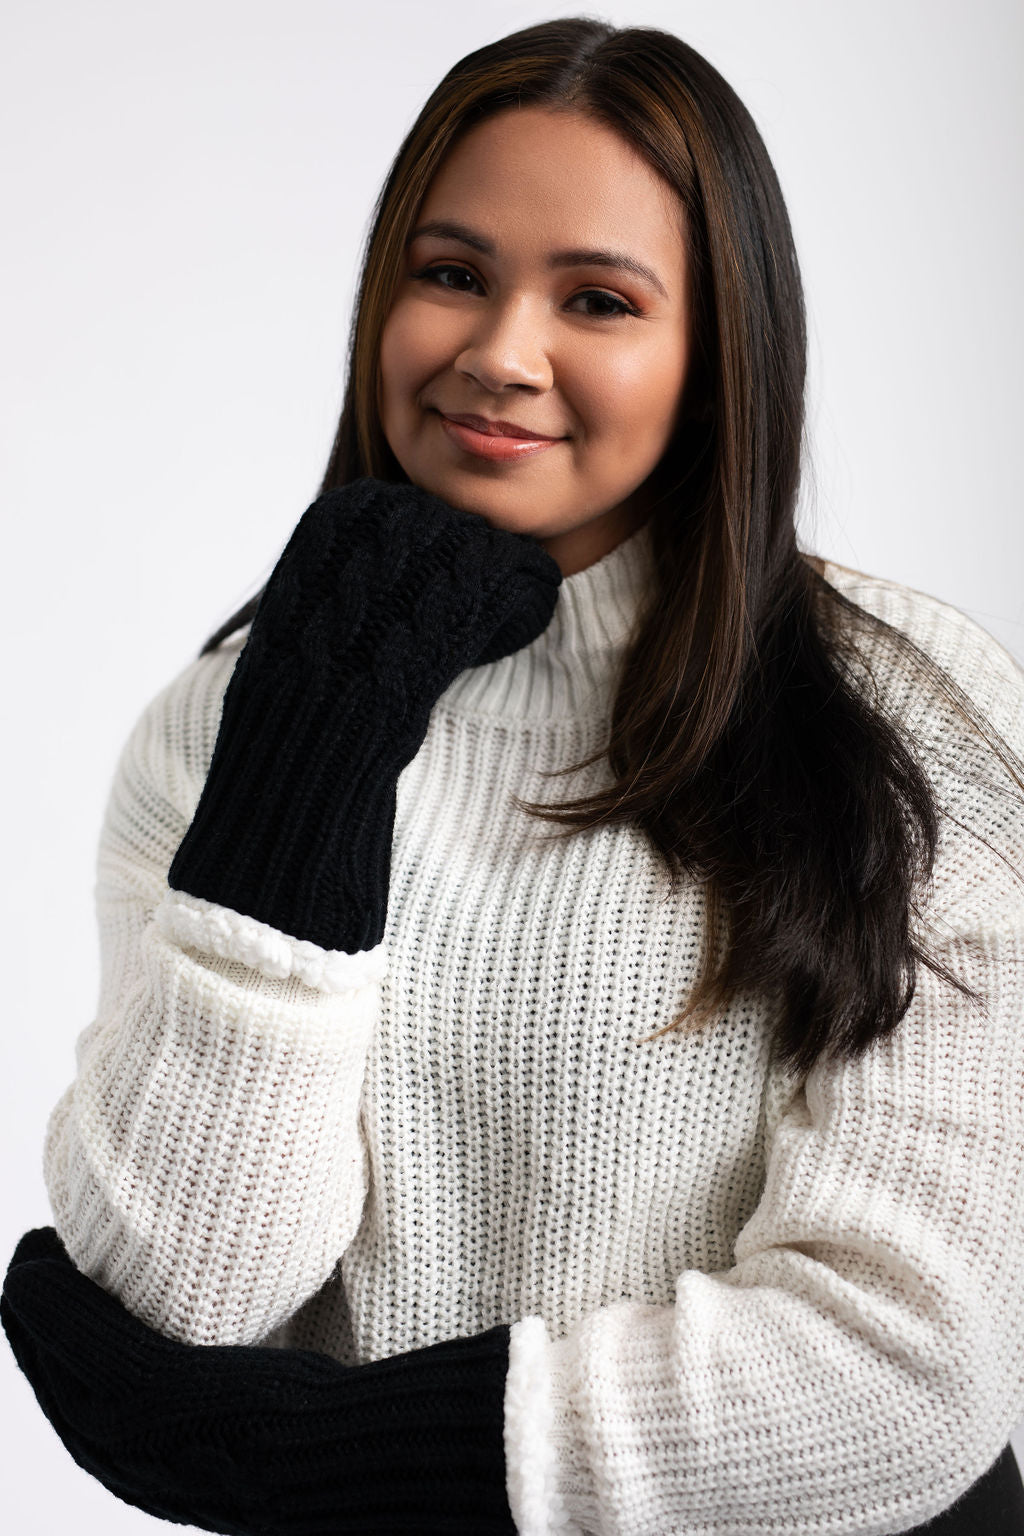 Just Cozy Accessories | Just Cozy Fleece-Lined Mittens | Color: Black/White | Size: Os | Pm-76800187's Closet